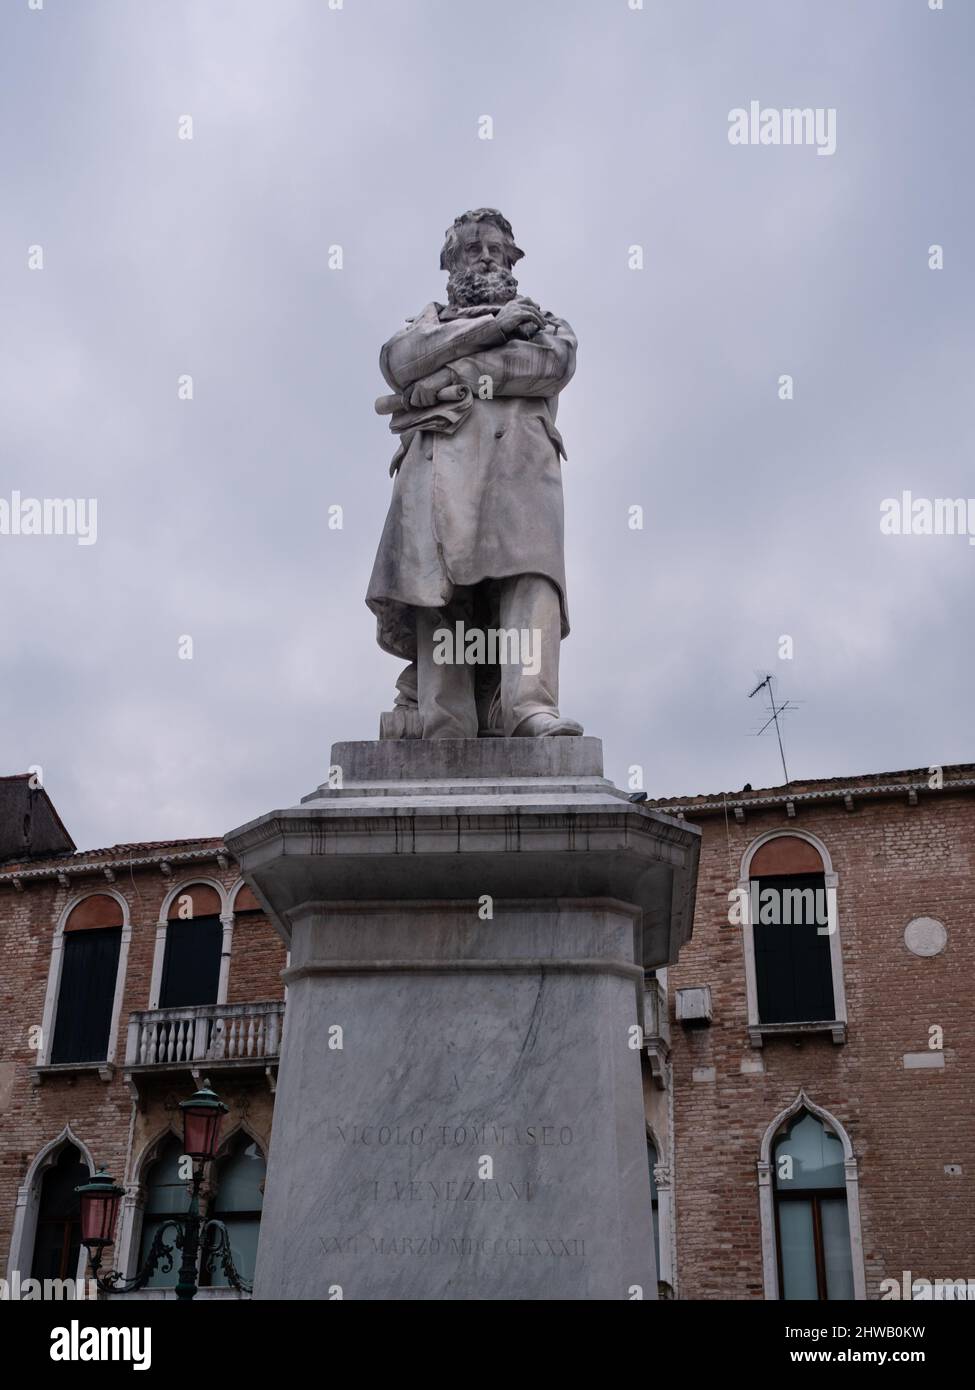 Nicolo Tommaseo Statue on Campo San Stefano in Venice, Italy, made by Francesco Barzaghi in 1882 with inscription 'To Nicolo Tommaseo from the Venetia Stock Photo